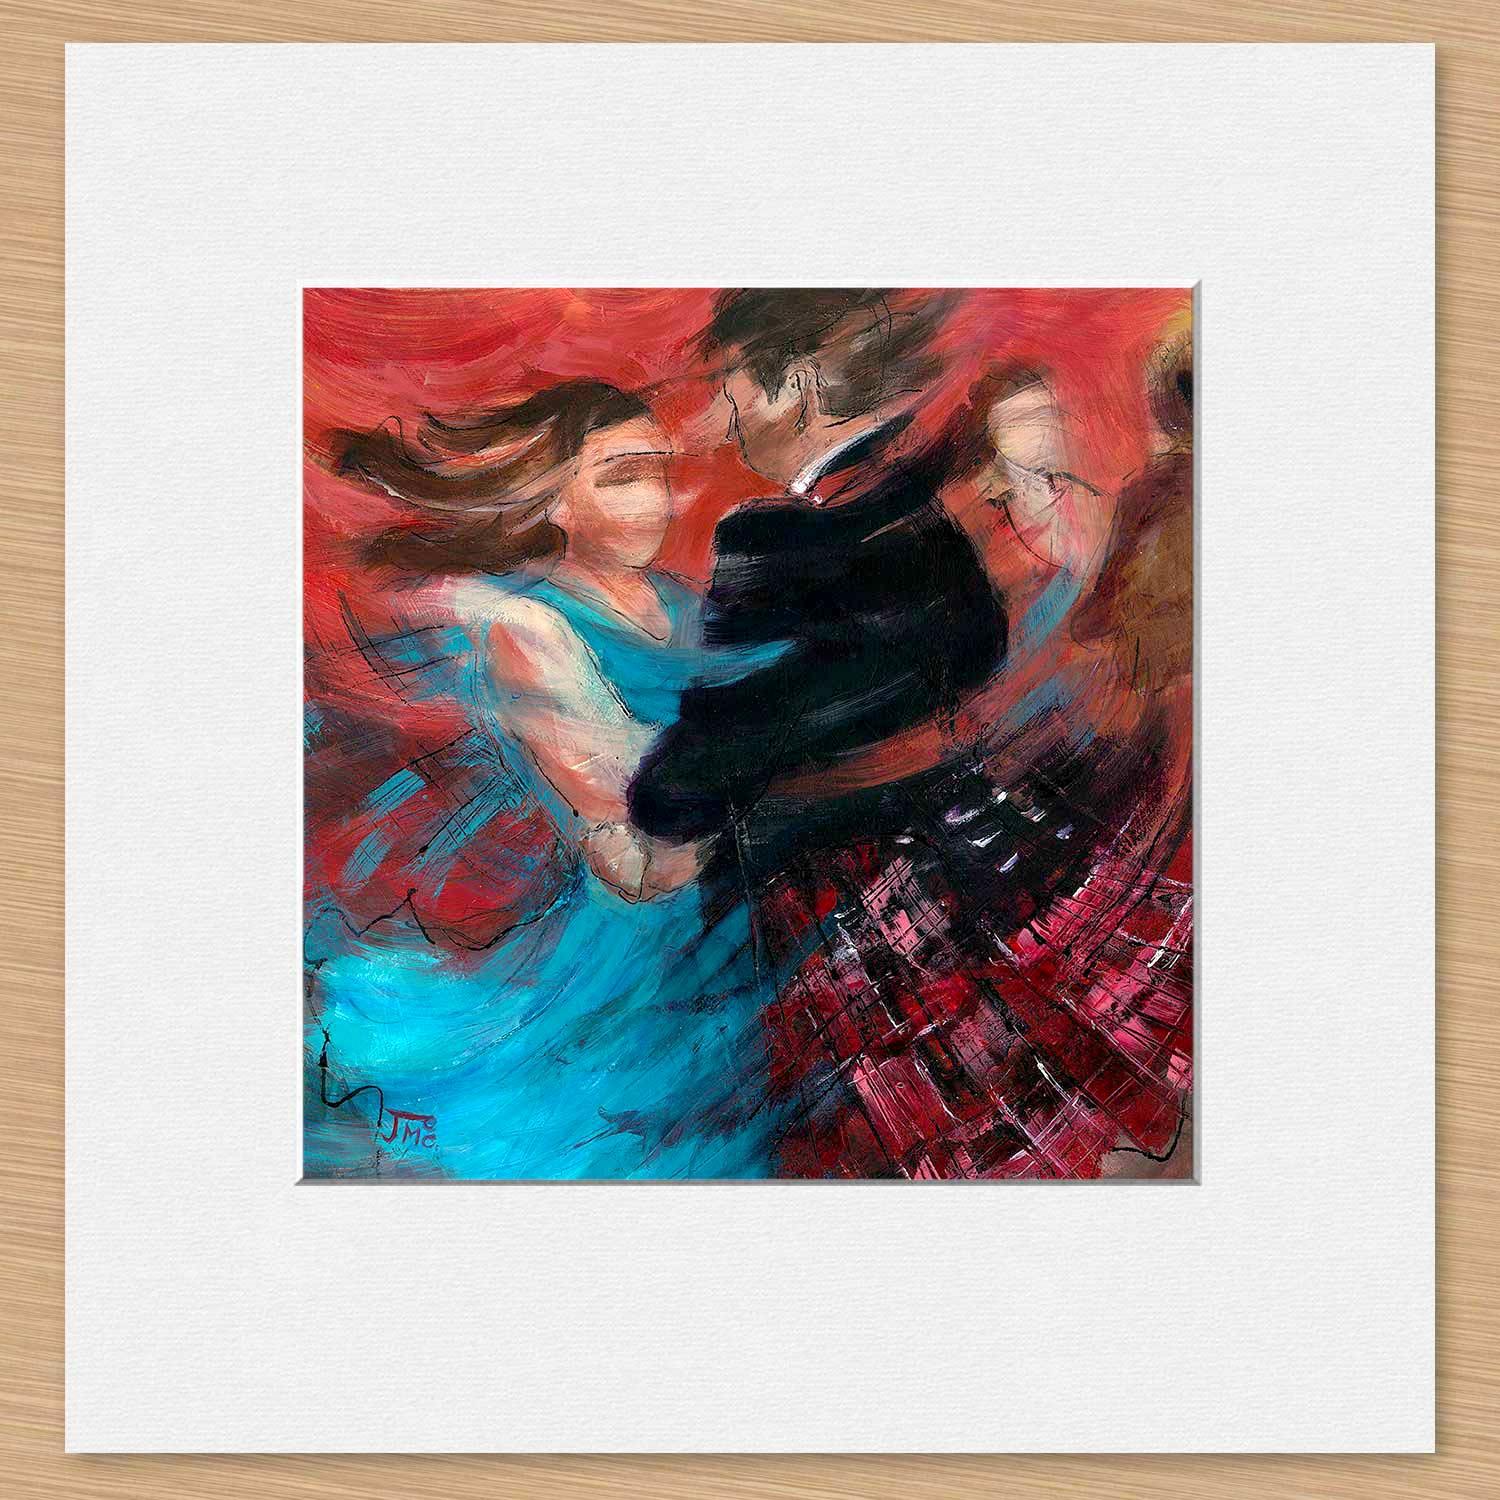 Ceilidh Mounted Card from an original painting by artist Janet McCrorie